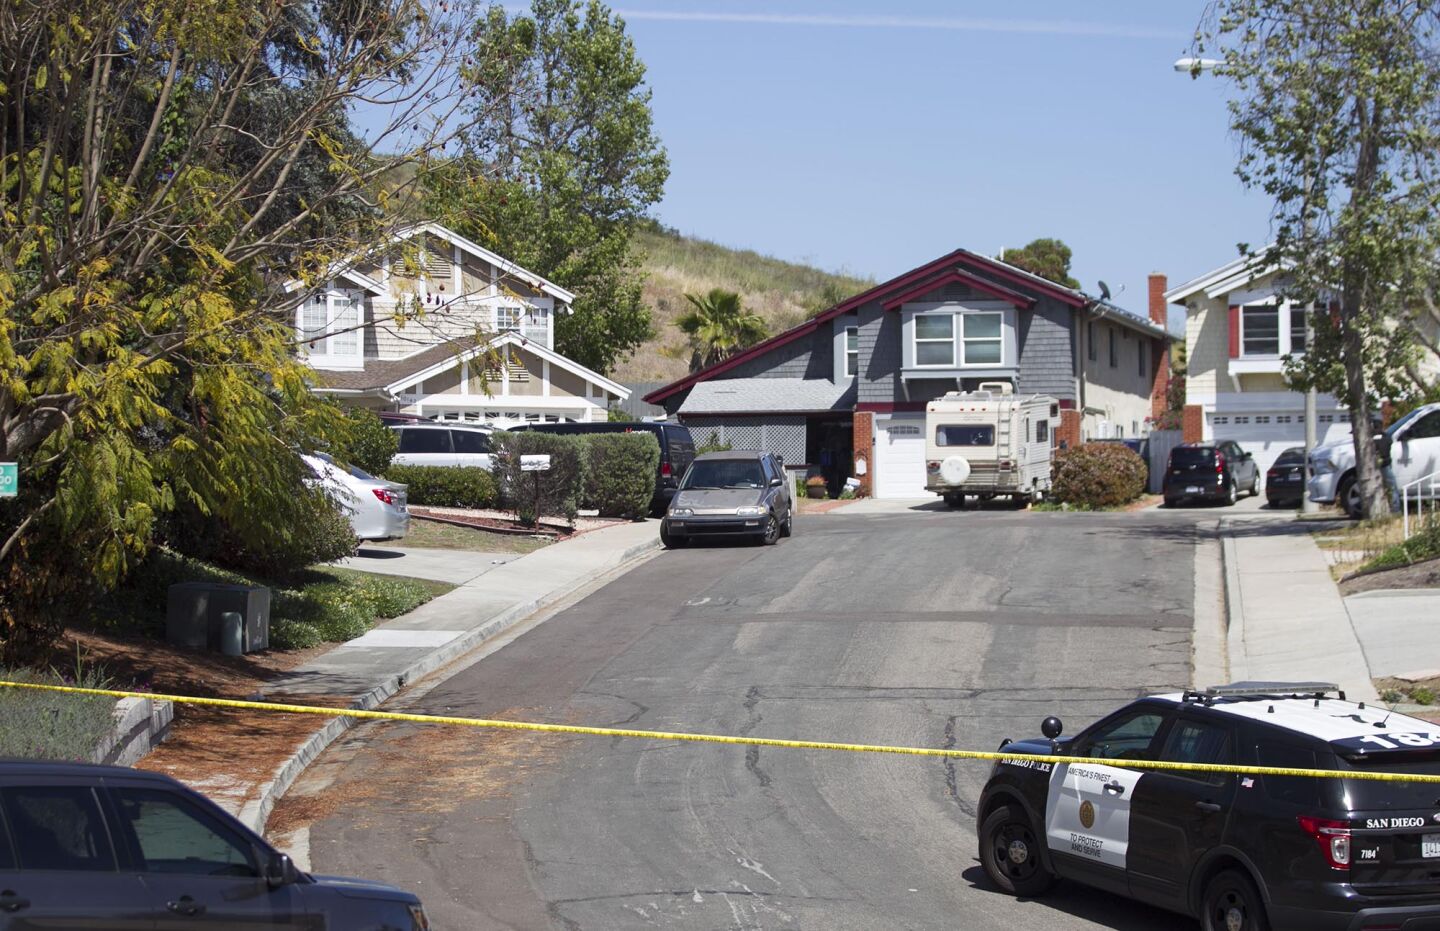 A view up the cul-de-sac in the Rancho Peñasquitos neighborhood of San Diego where the house thought to be the home of 19 year-old John Earnest, is located. Earnest is a suspect in the shooting of four people in a Poway synagogue, killing one, on Saturday April 27, 2019 in San Diego, California. The house is on a cul de sac in the Rancho Peñasquitos neighborhood in the north part of the city.